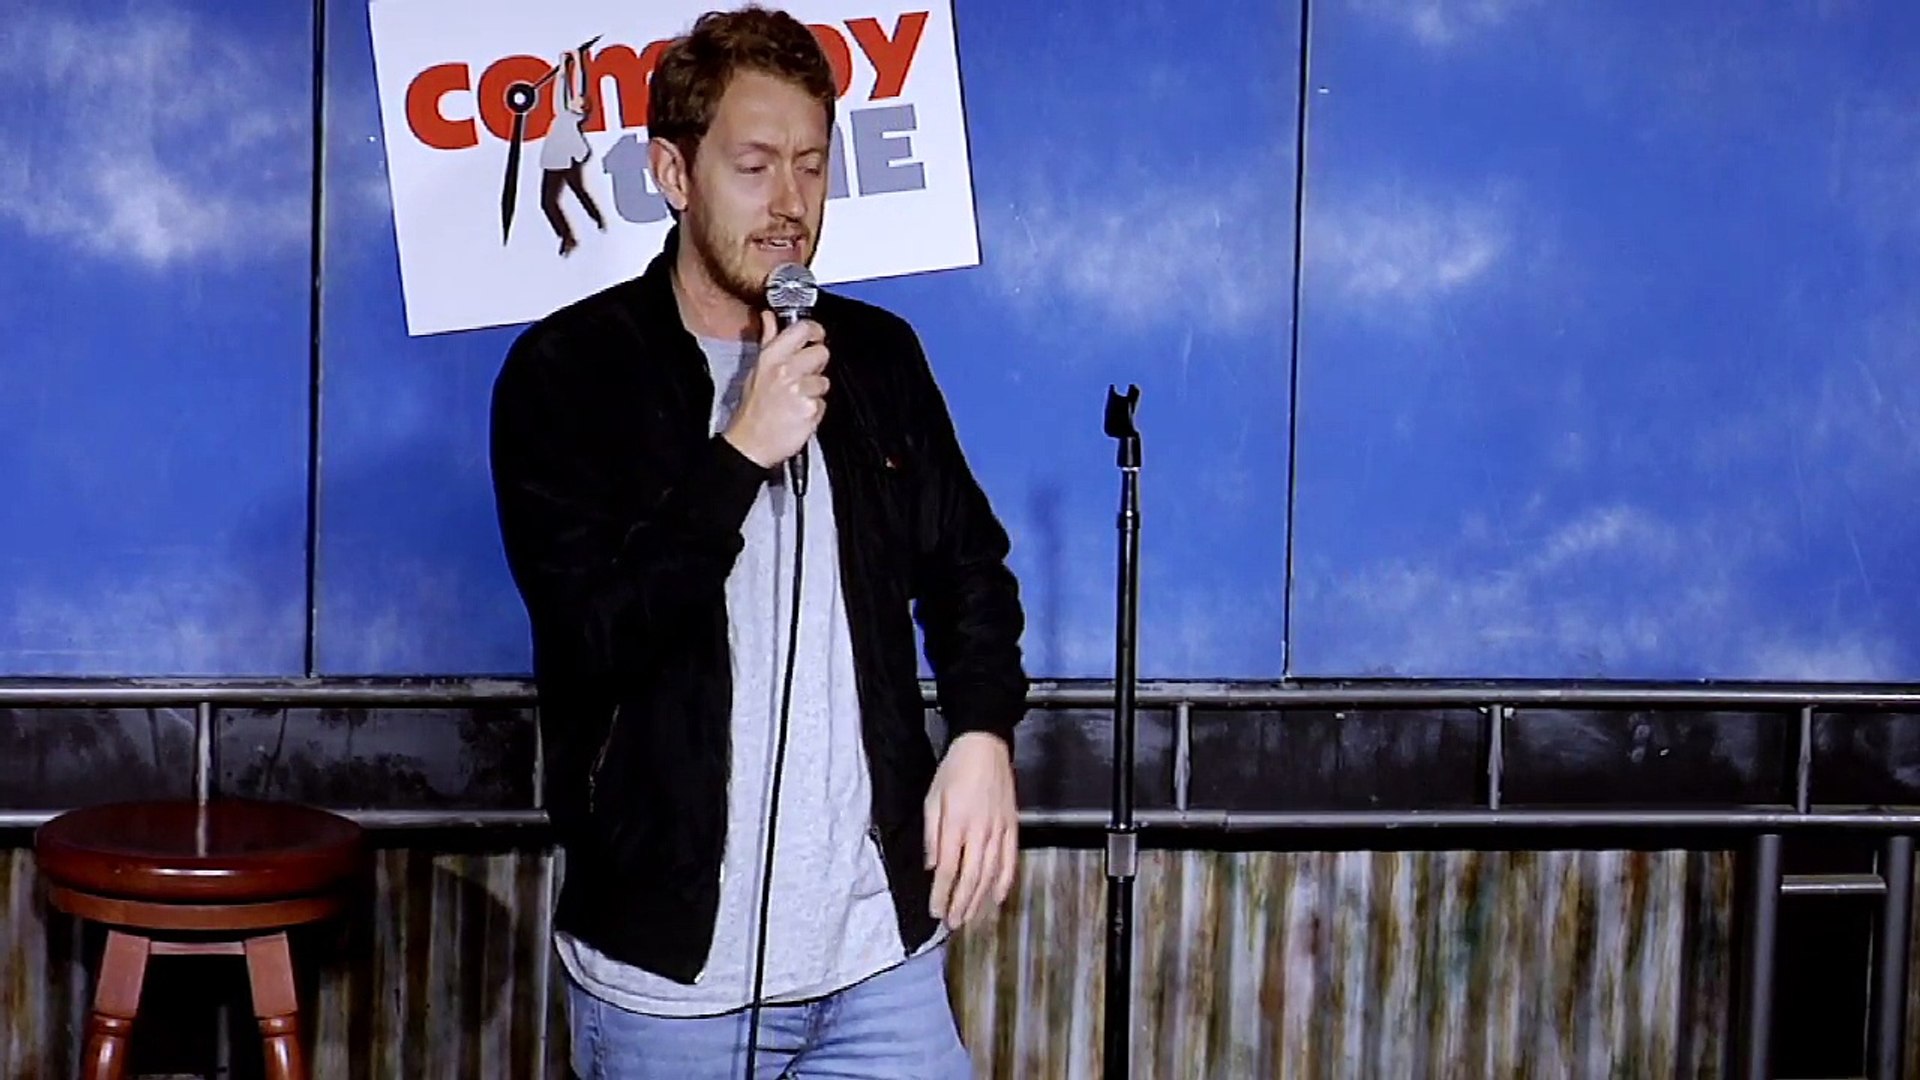 Alex Oliver: Skunks and Weed (Stand Up Comedy)